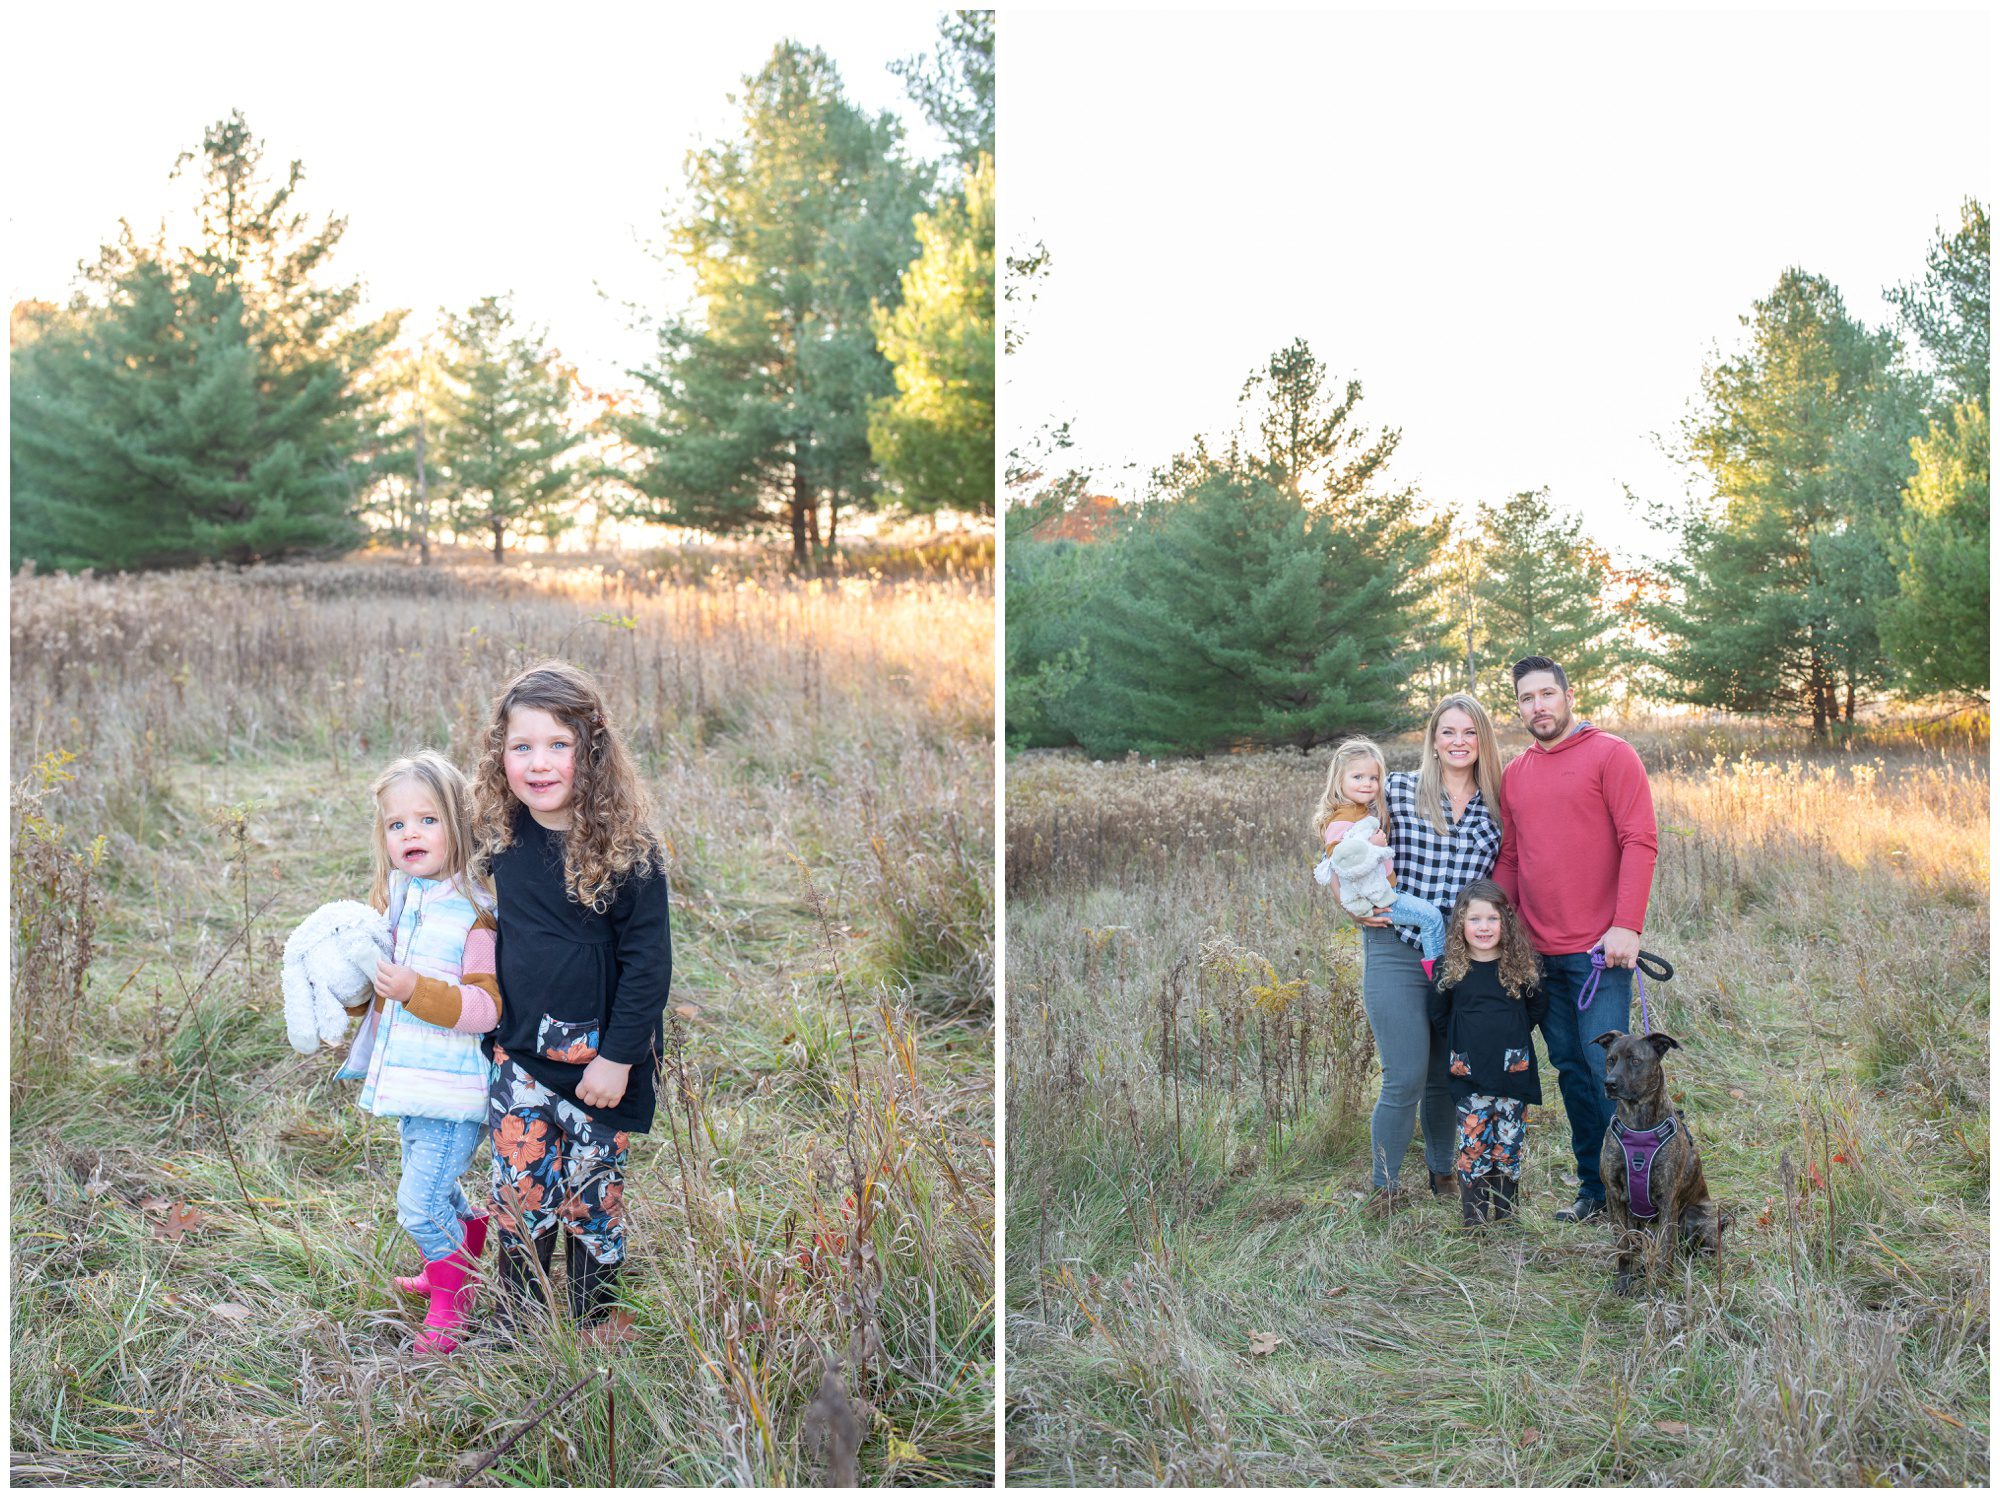 Fall Minis, Fall Mini Sessions London Ontario, Michelle A Photography